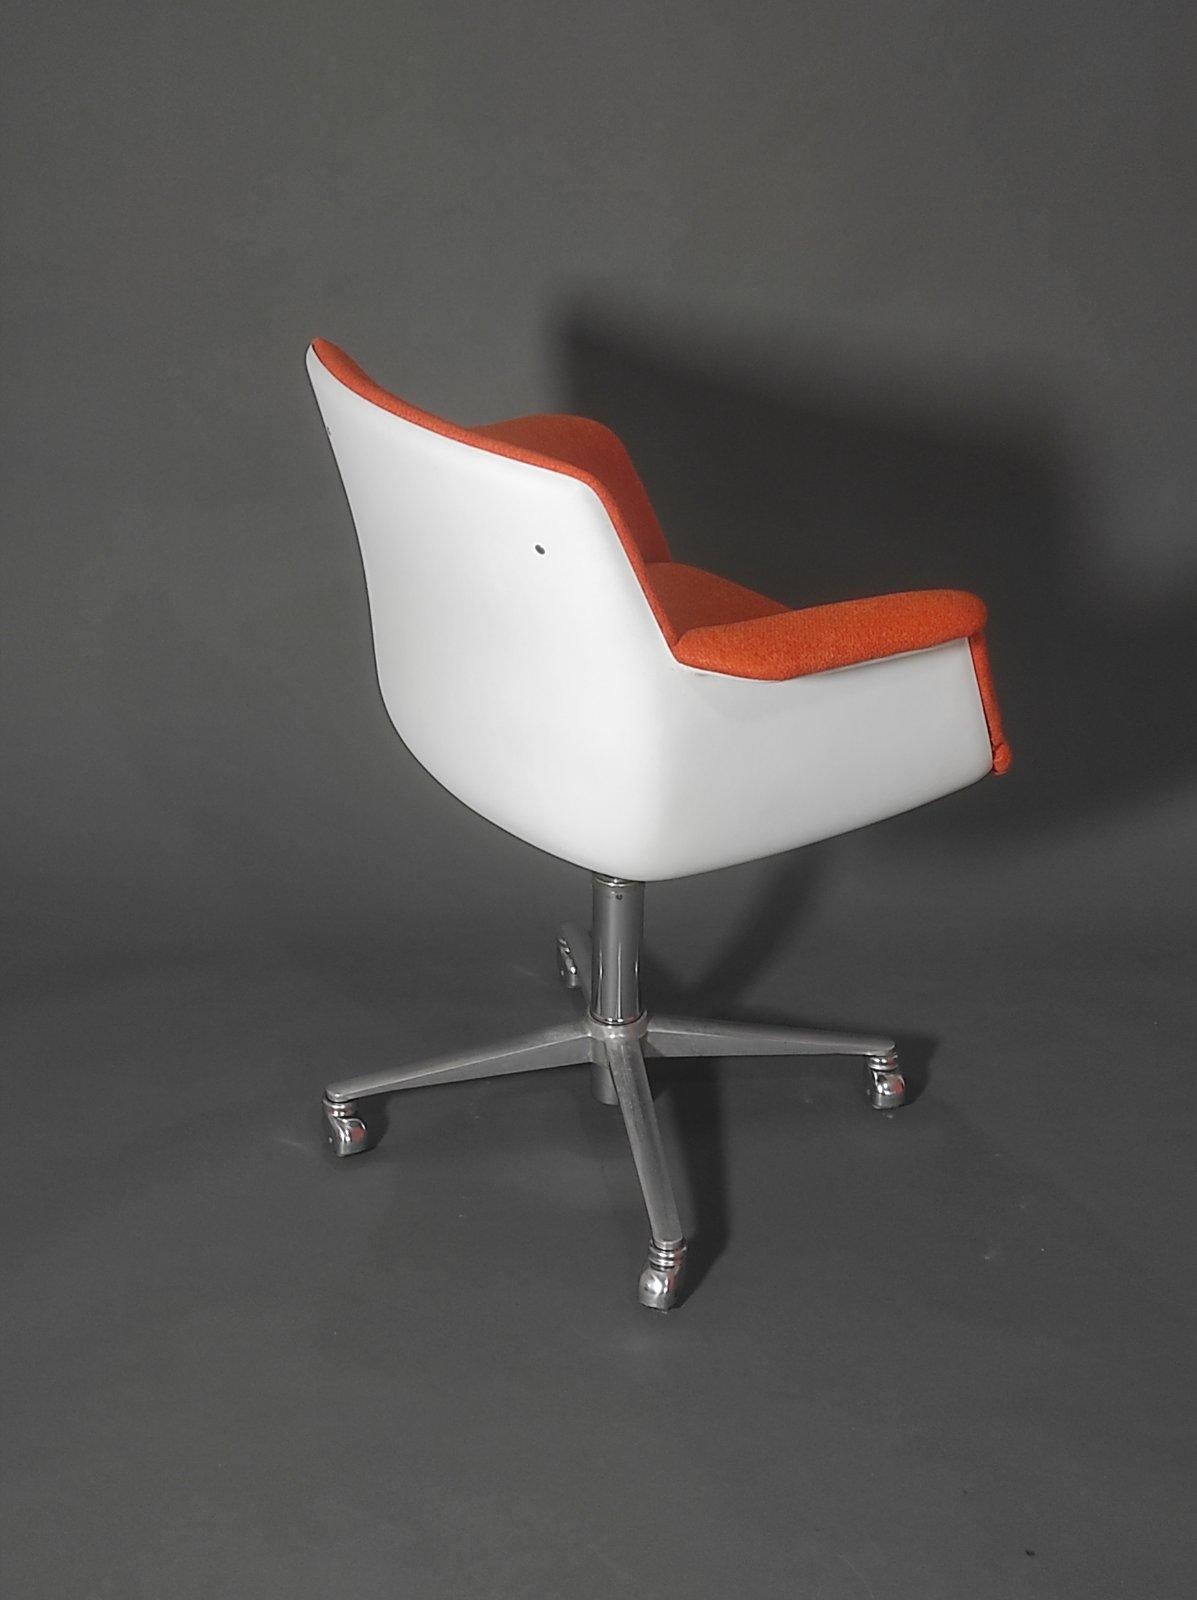 Mid-20th Century Model 250 Space Age Ofice Chair By Georg Leowald for Vilkhahn 1960s For Sale